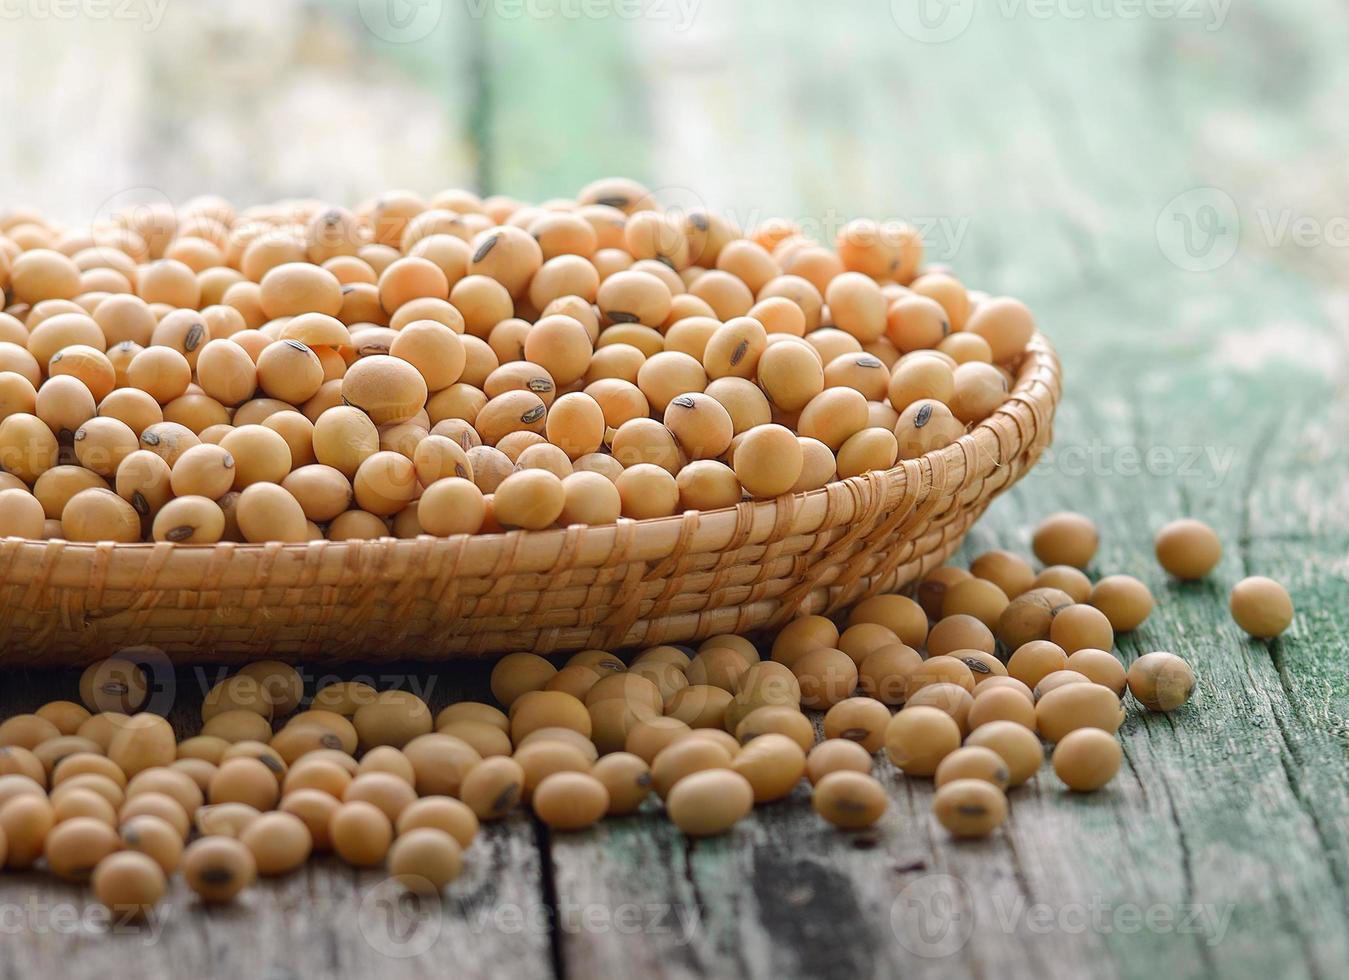 Soy beans in a basket on wooden photo